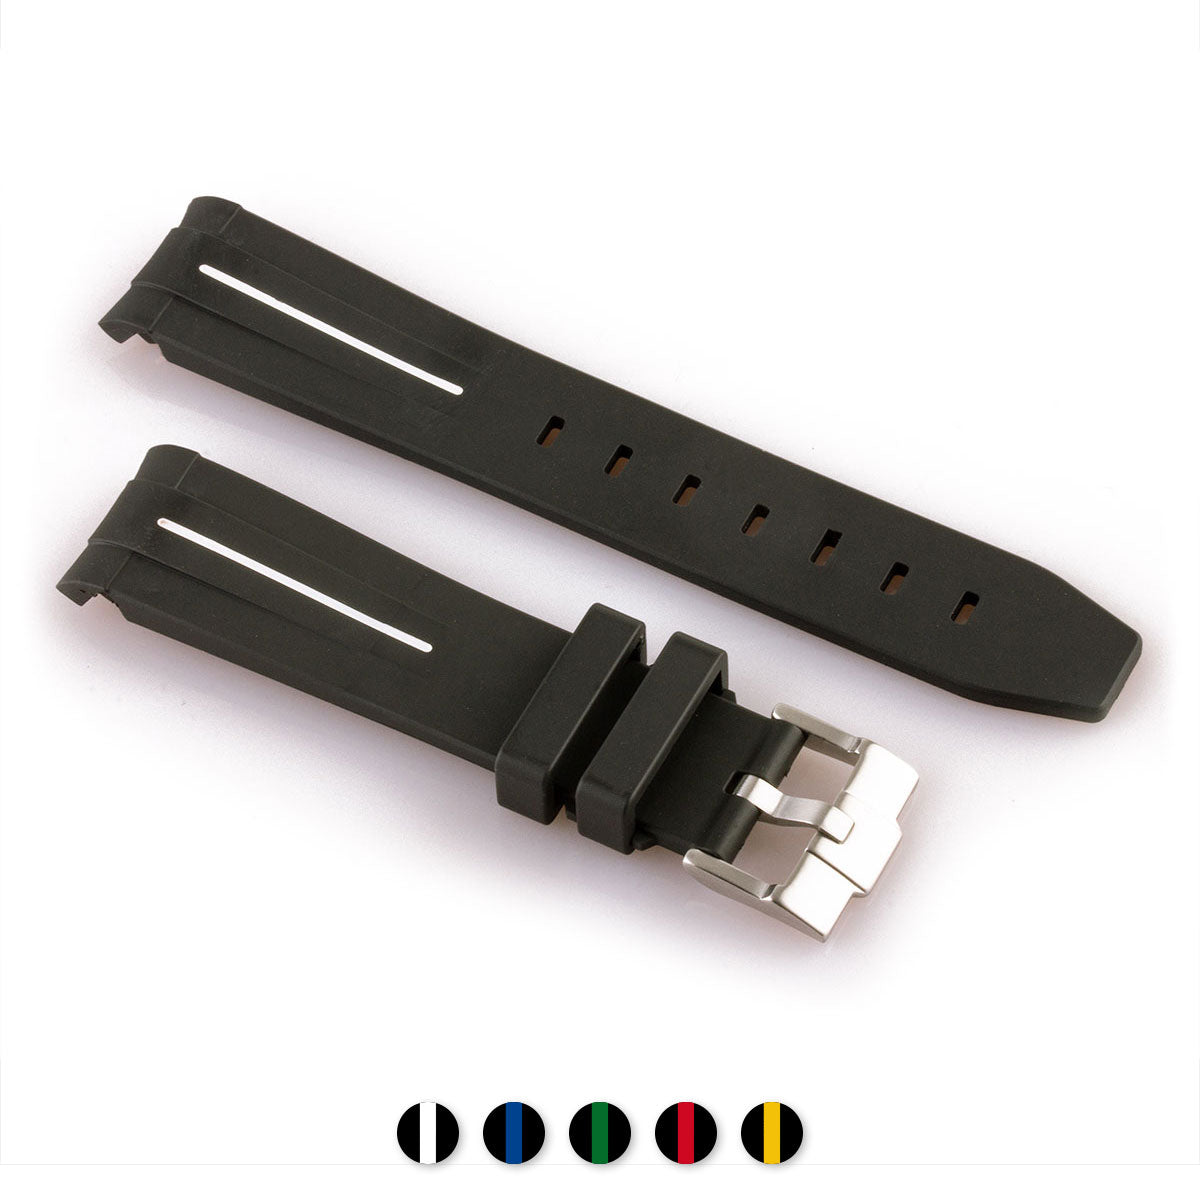 ​Rolex - FKM Rubber integrated watch band with tang buckle - Black rubber with stripe (blue, green, red...)